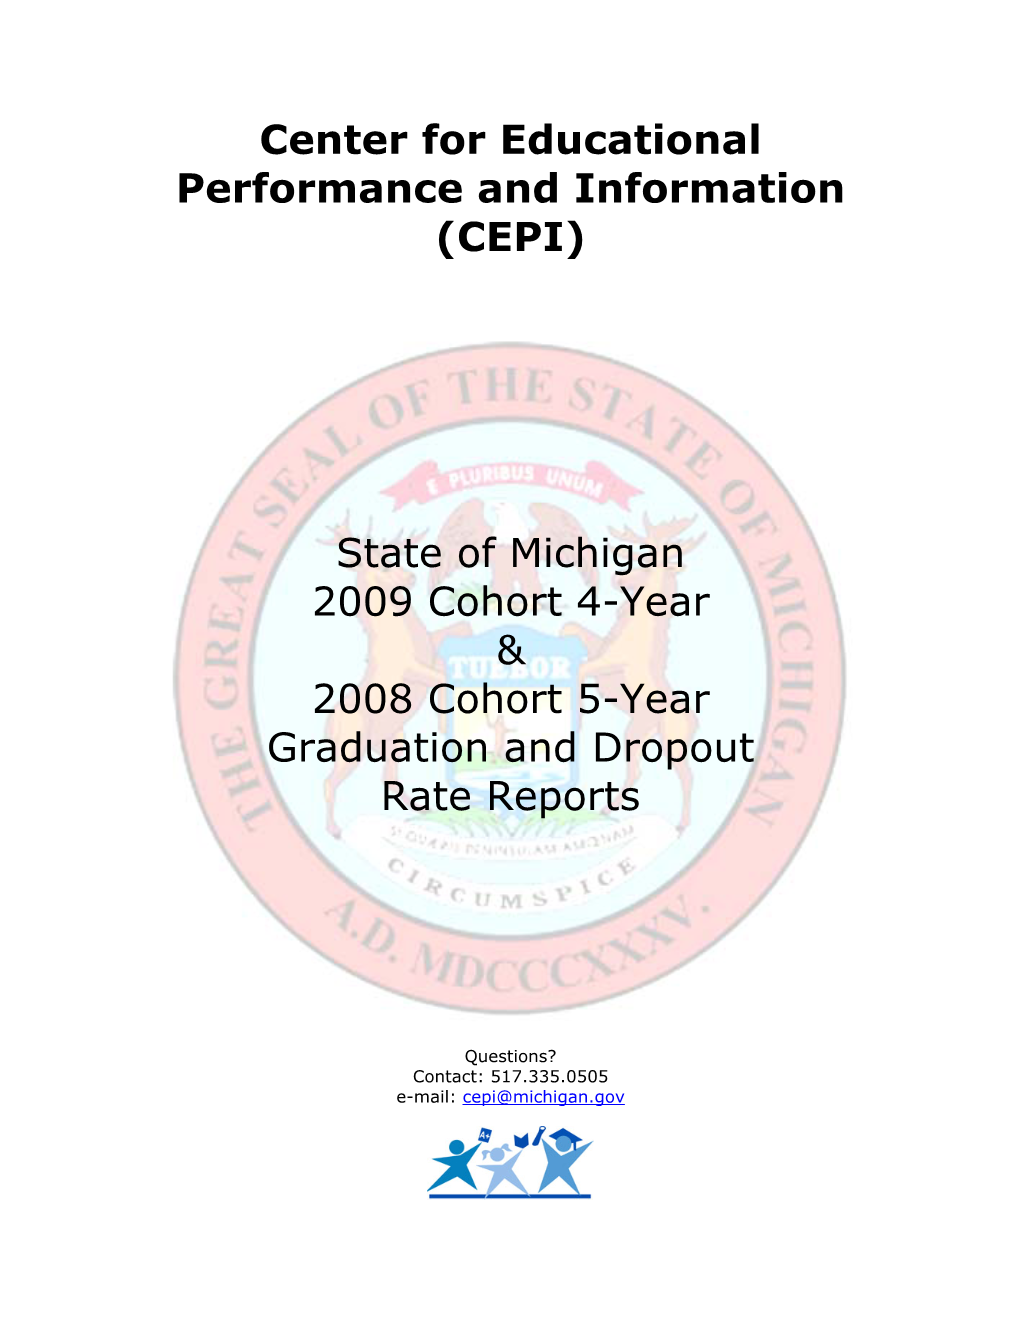 State of Michigan 2009 Cohort 4-Year Graduation and Dropout Rate Report